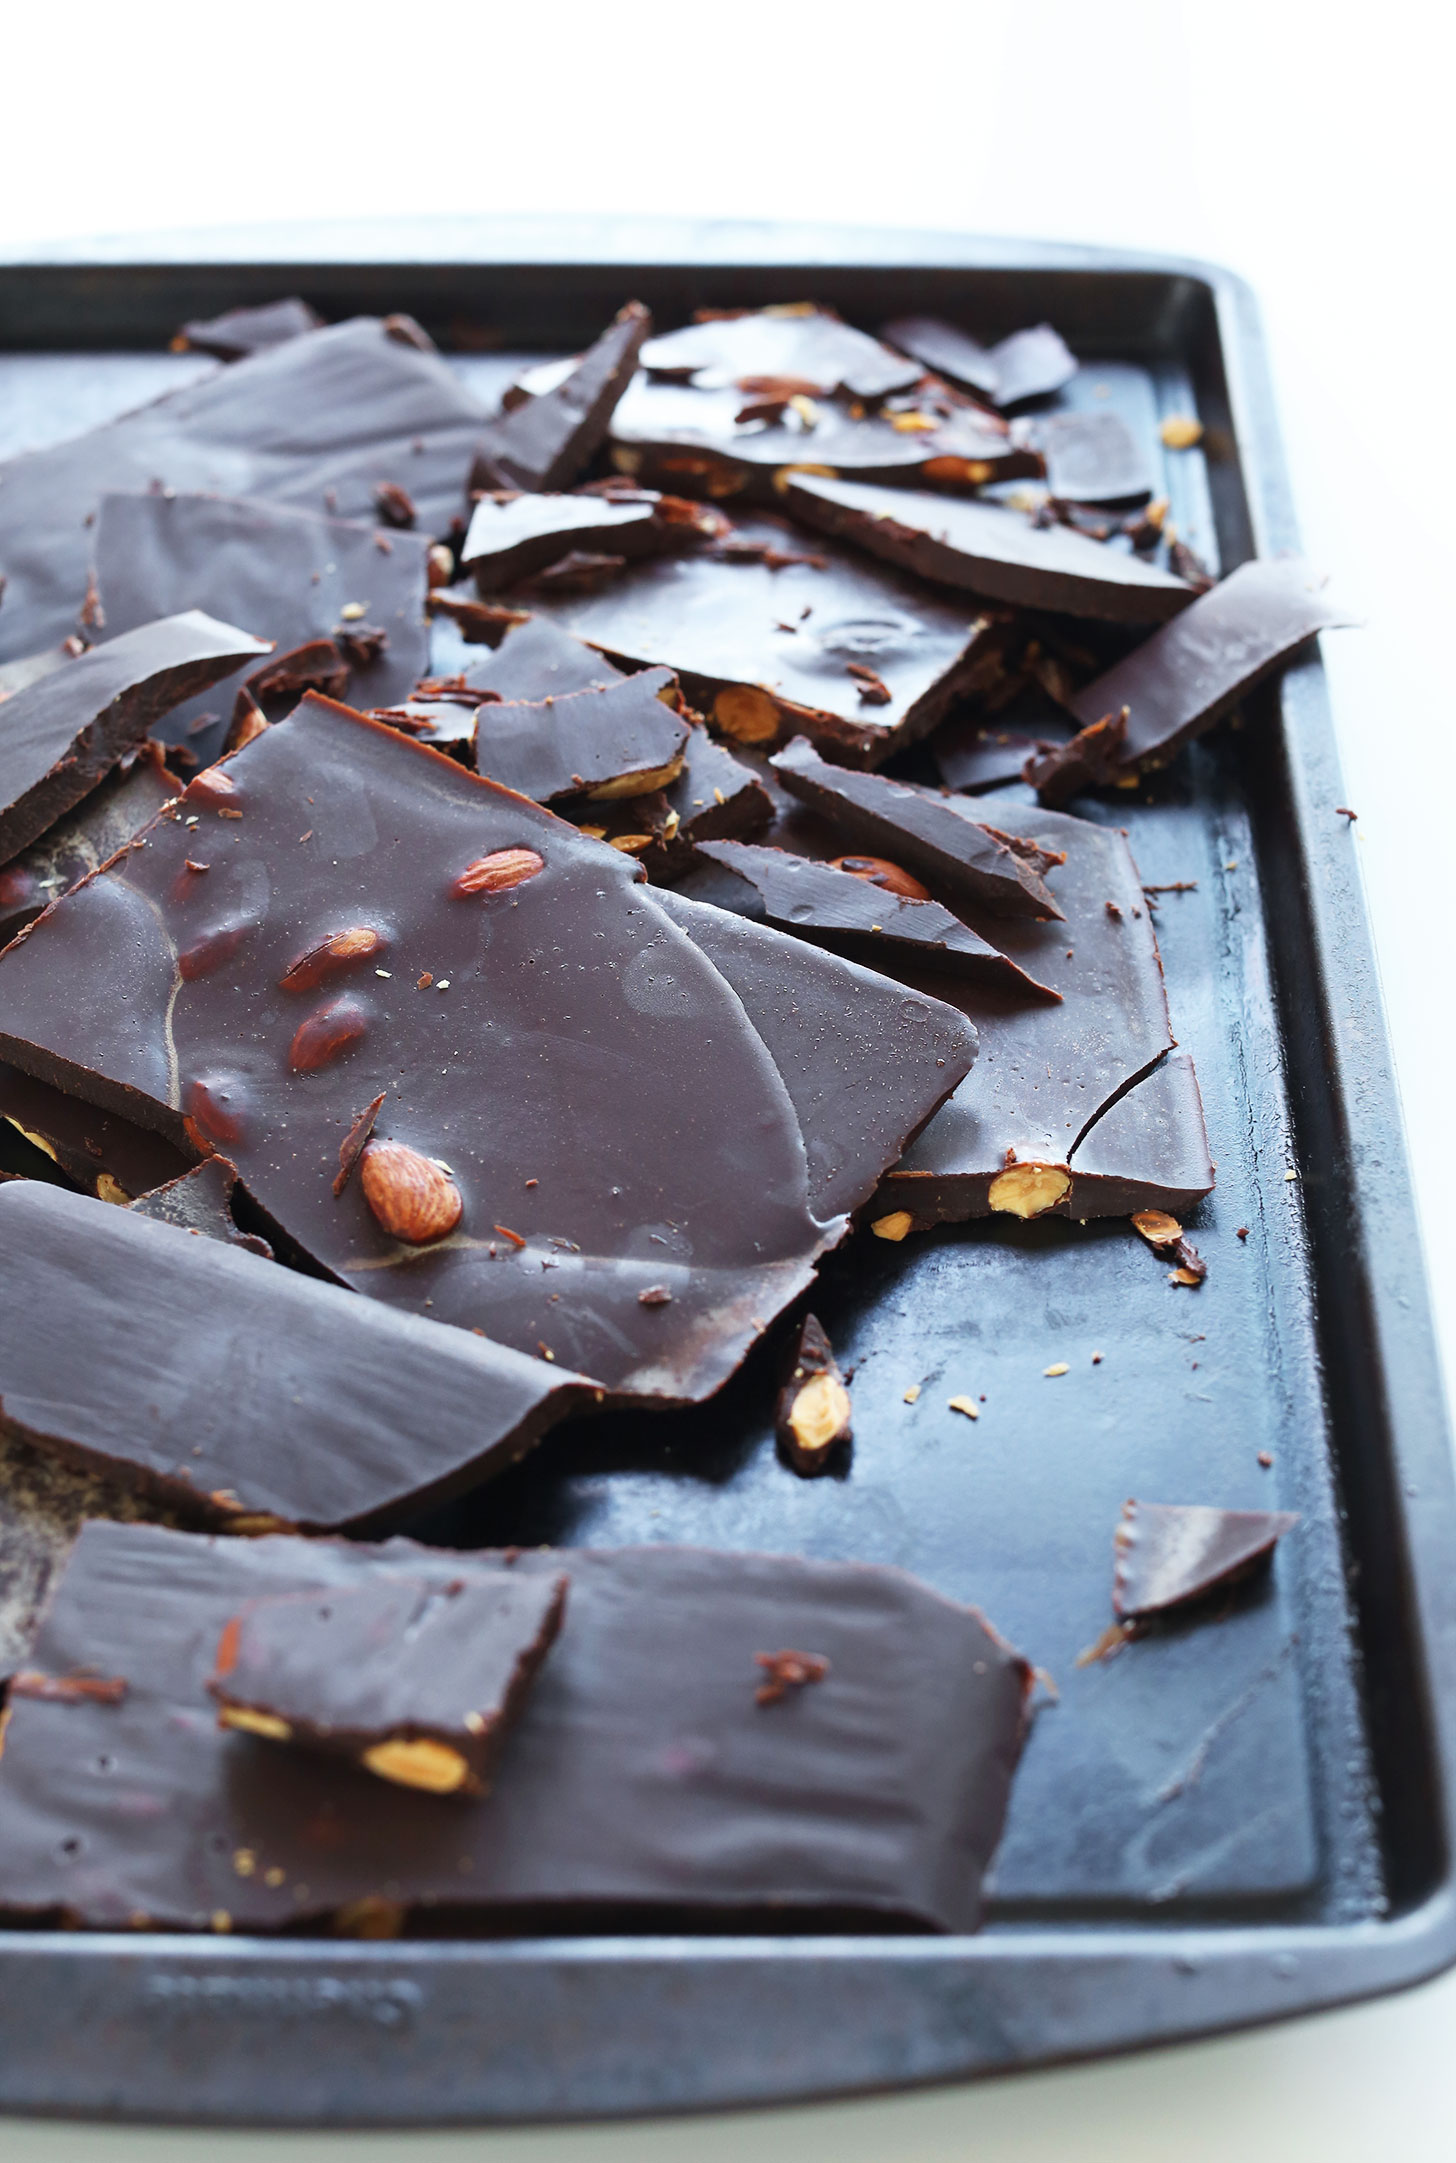 Baking sheet with DIY Dark Chocolate Bars with Almonds